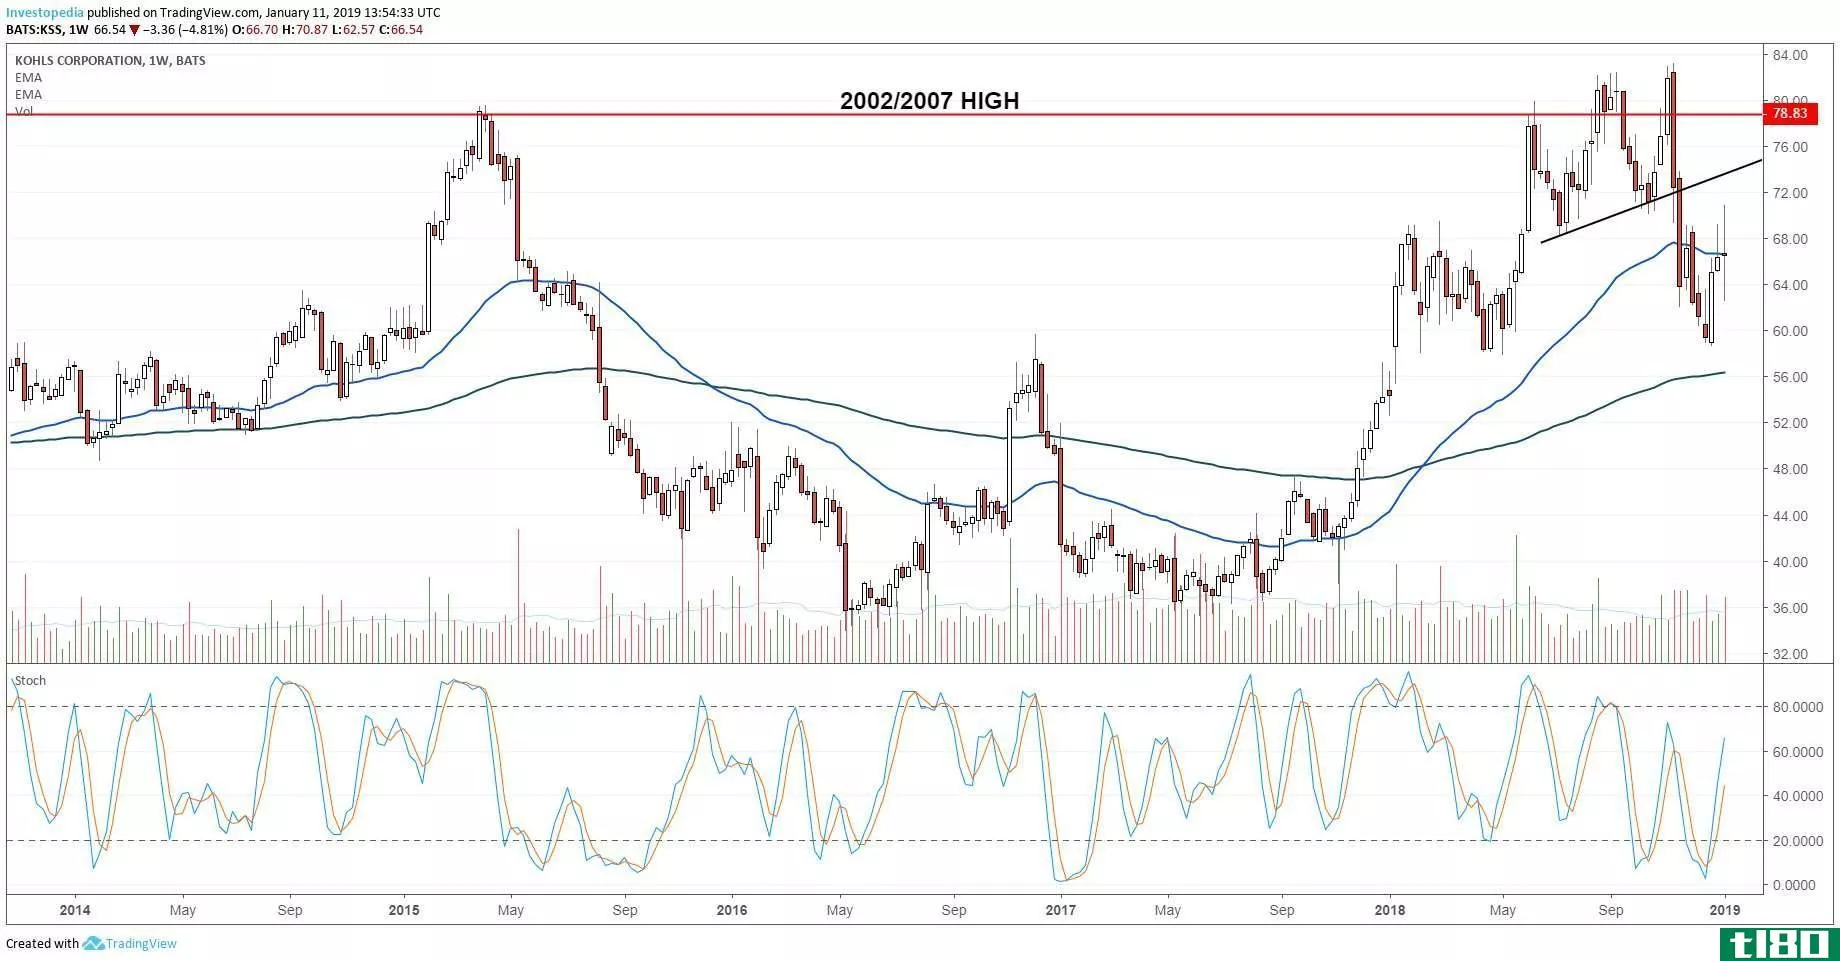 Technical chart showing the share price performance of Kohl's Corporation (KSS)